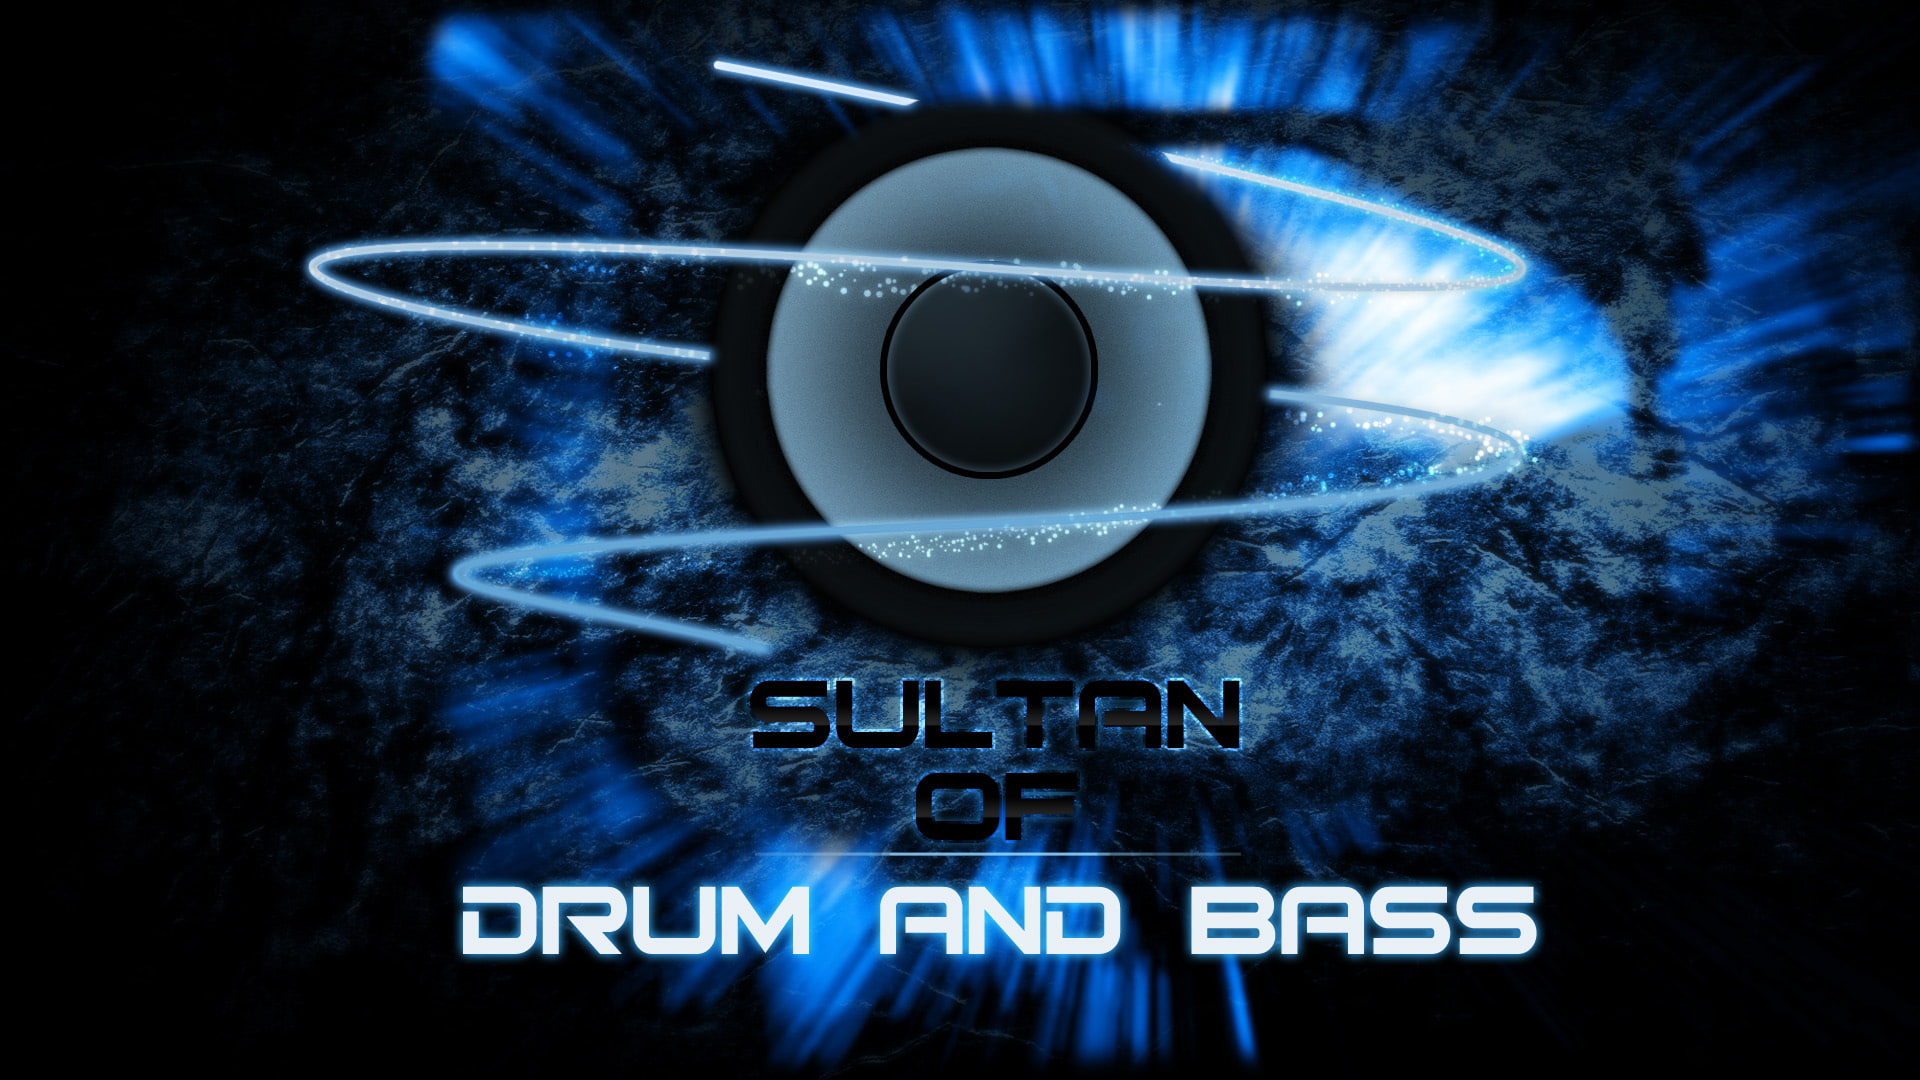 bass, dnb, drum, drum and bass, drum n bass, electronic